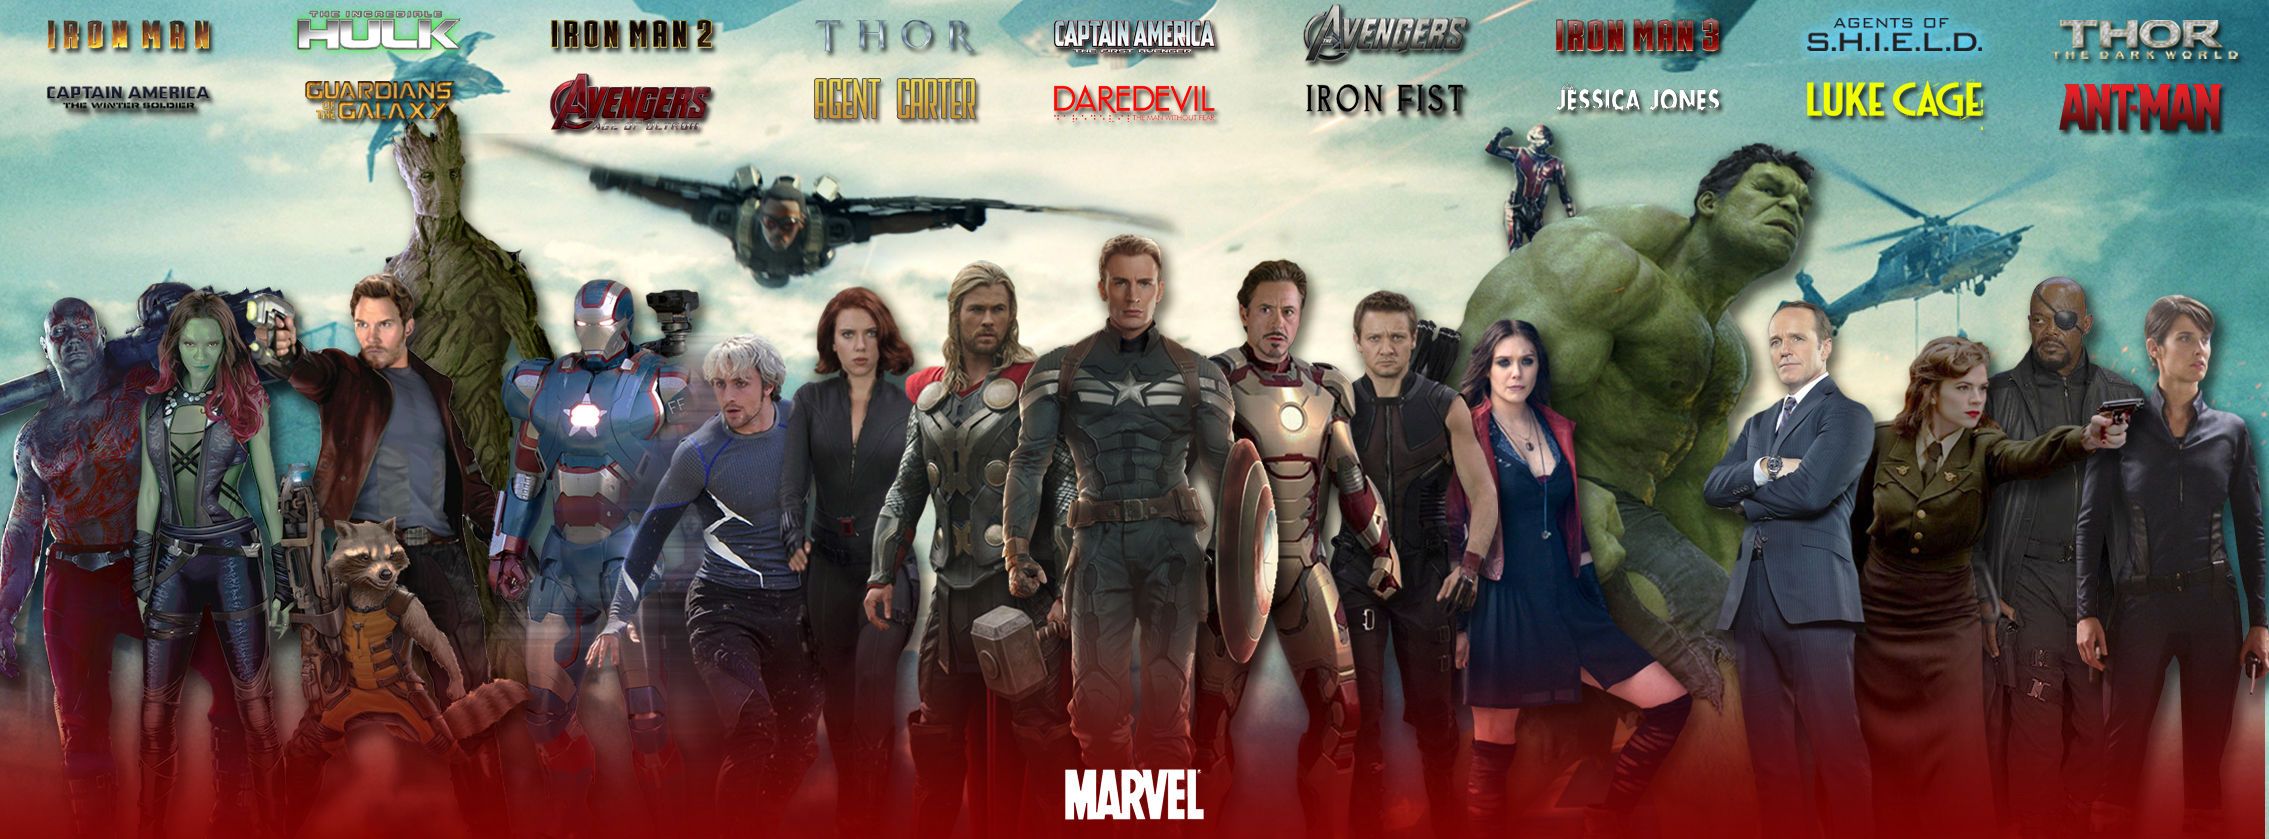 Marvel Cinematic Universe Cover